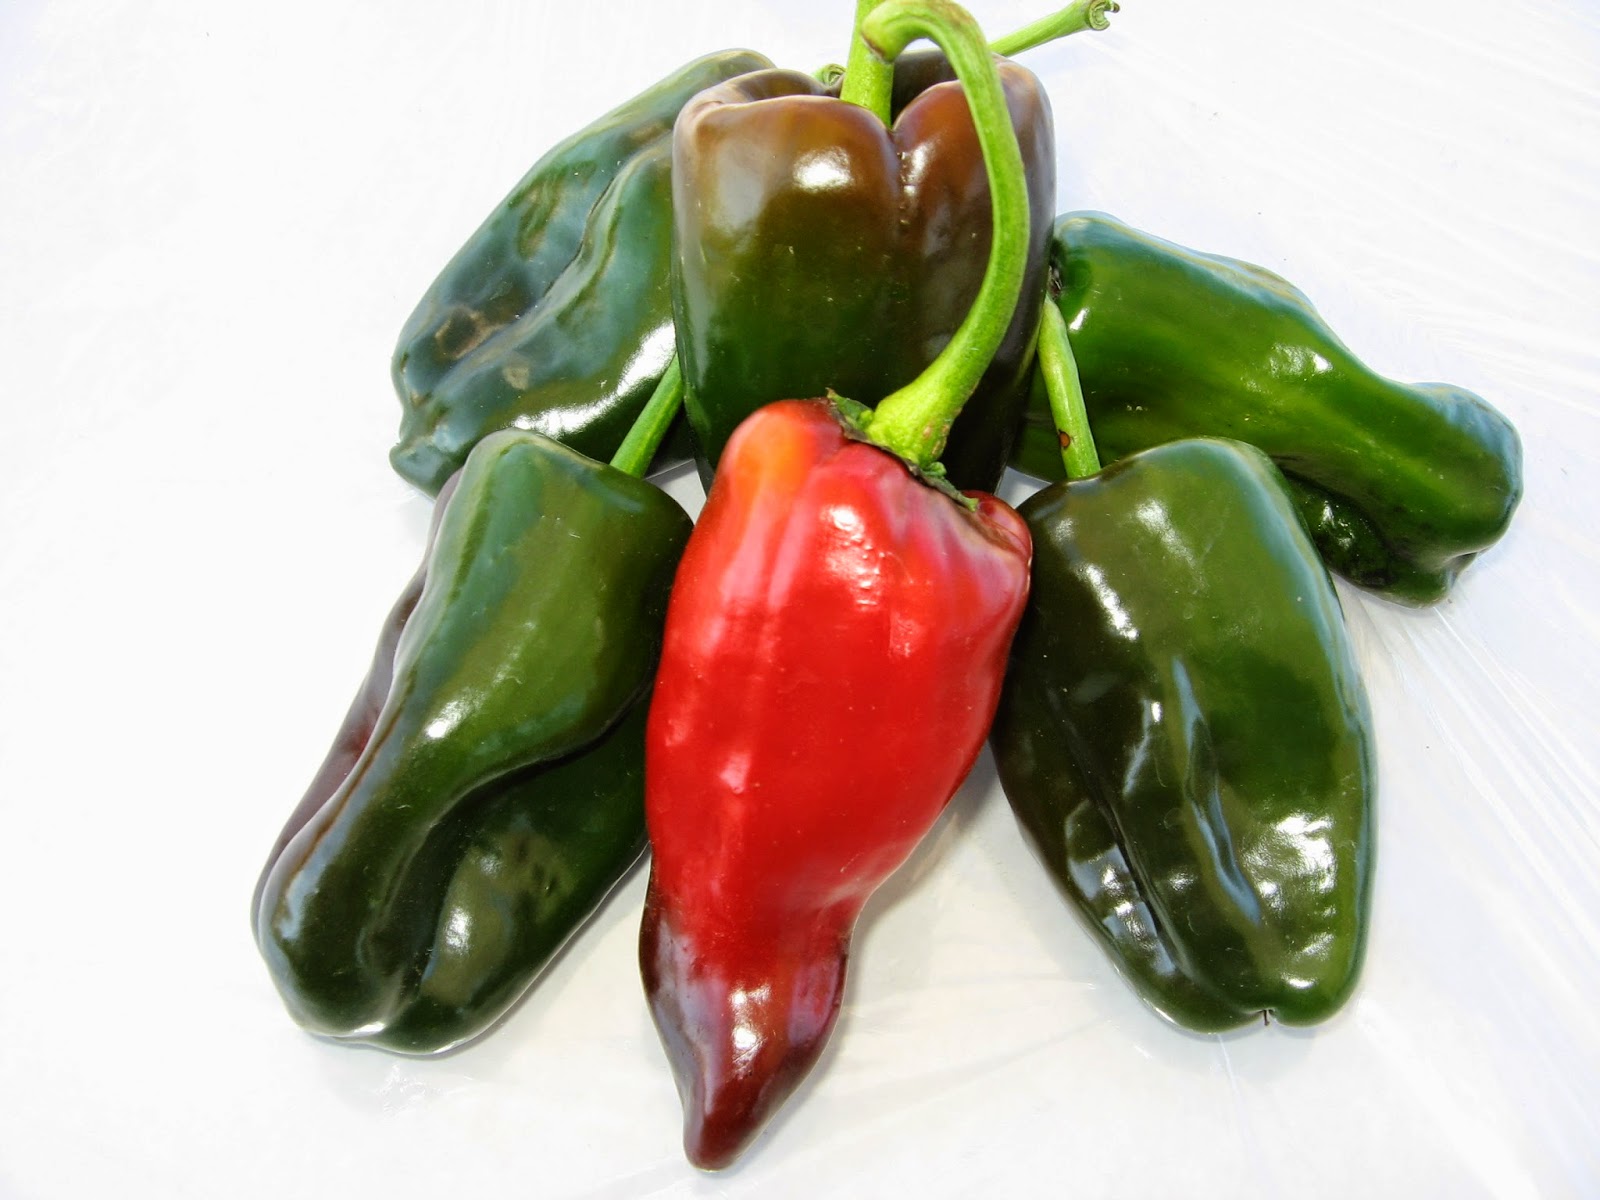 Poblano Peppers (aka ancho chiles)